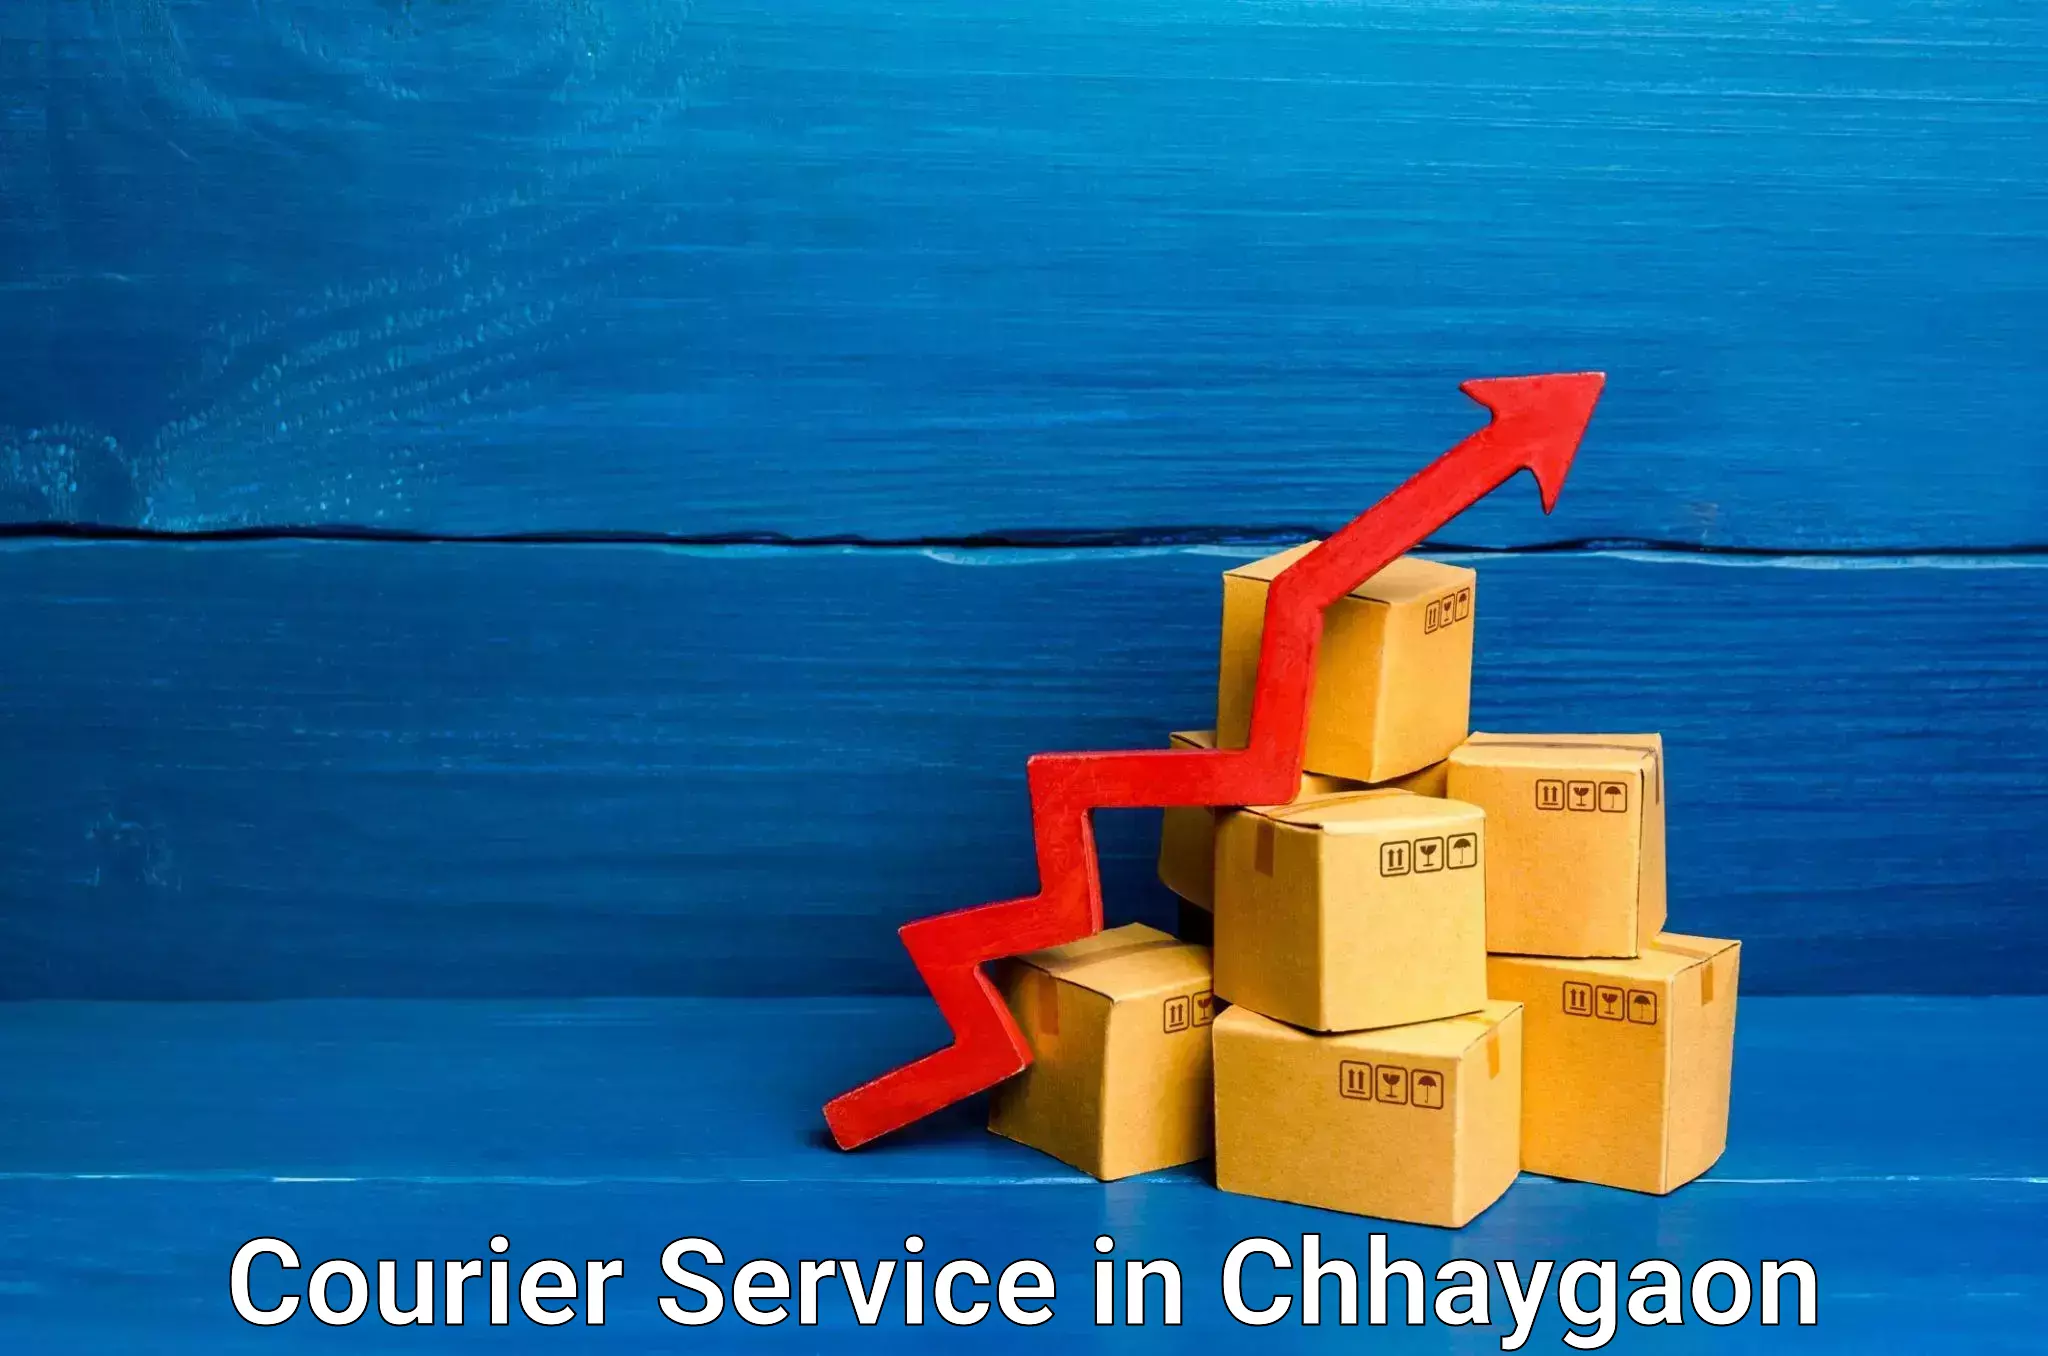 Affordable parcel service in Chhaygaon